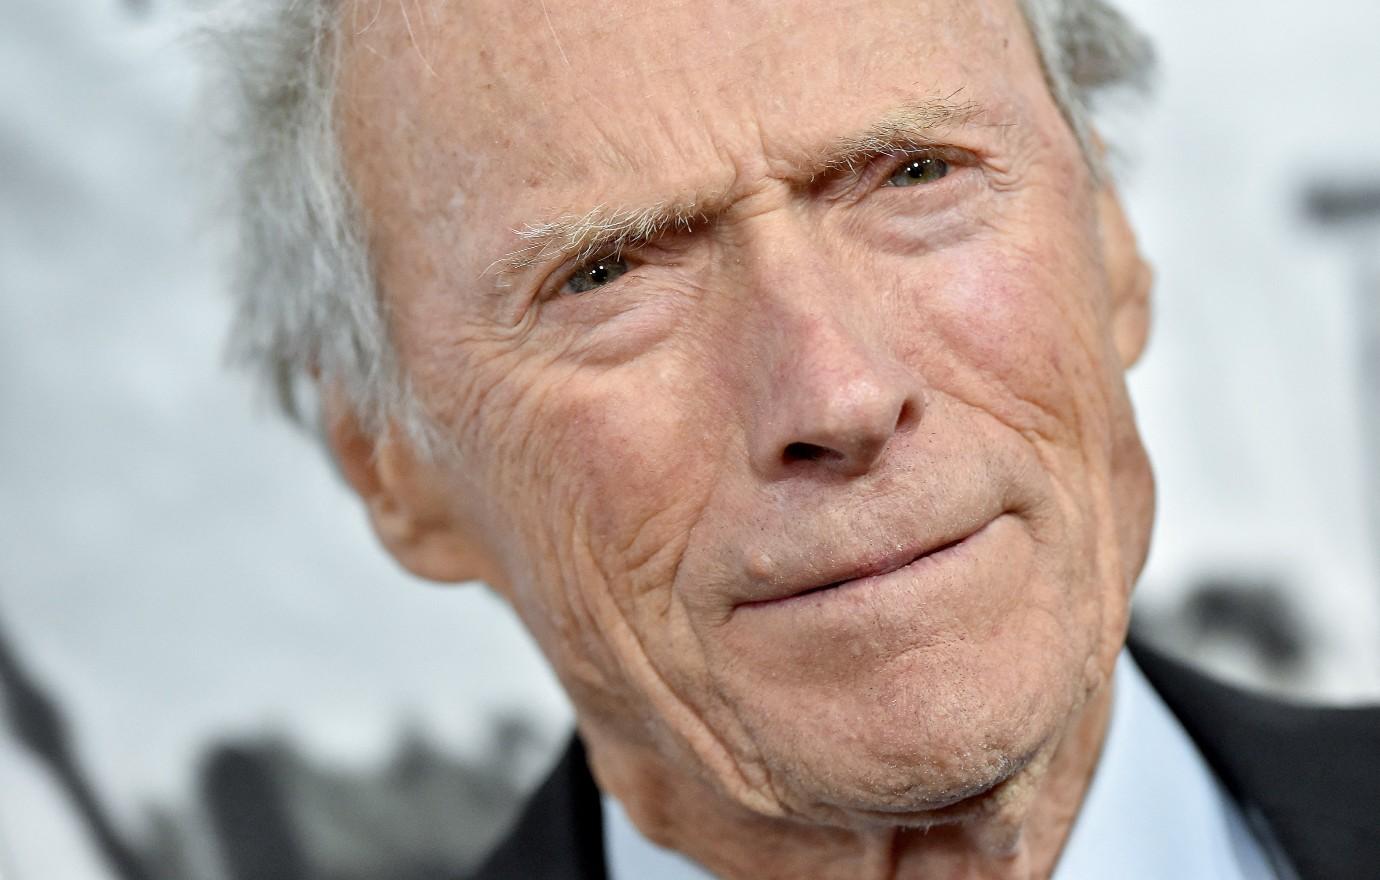 Clint Eastwood’s Inner Circle ‘Worried’ About Health For Final Film